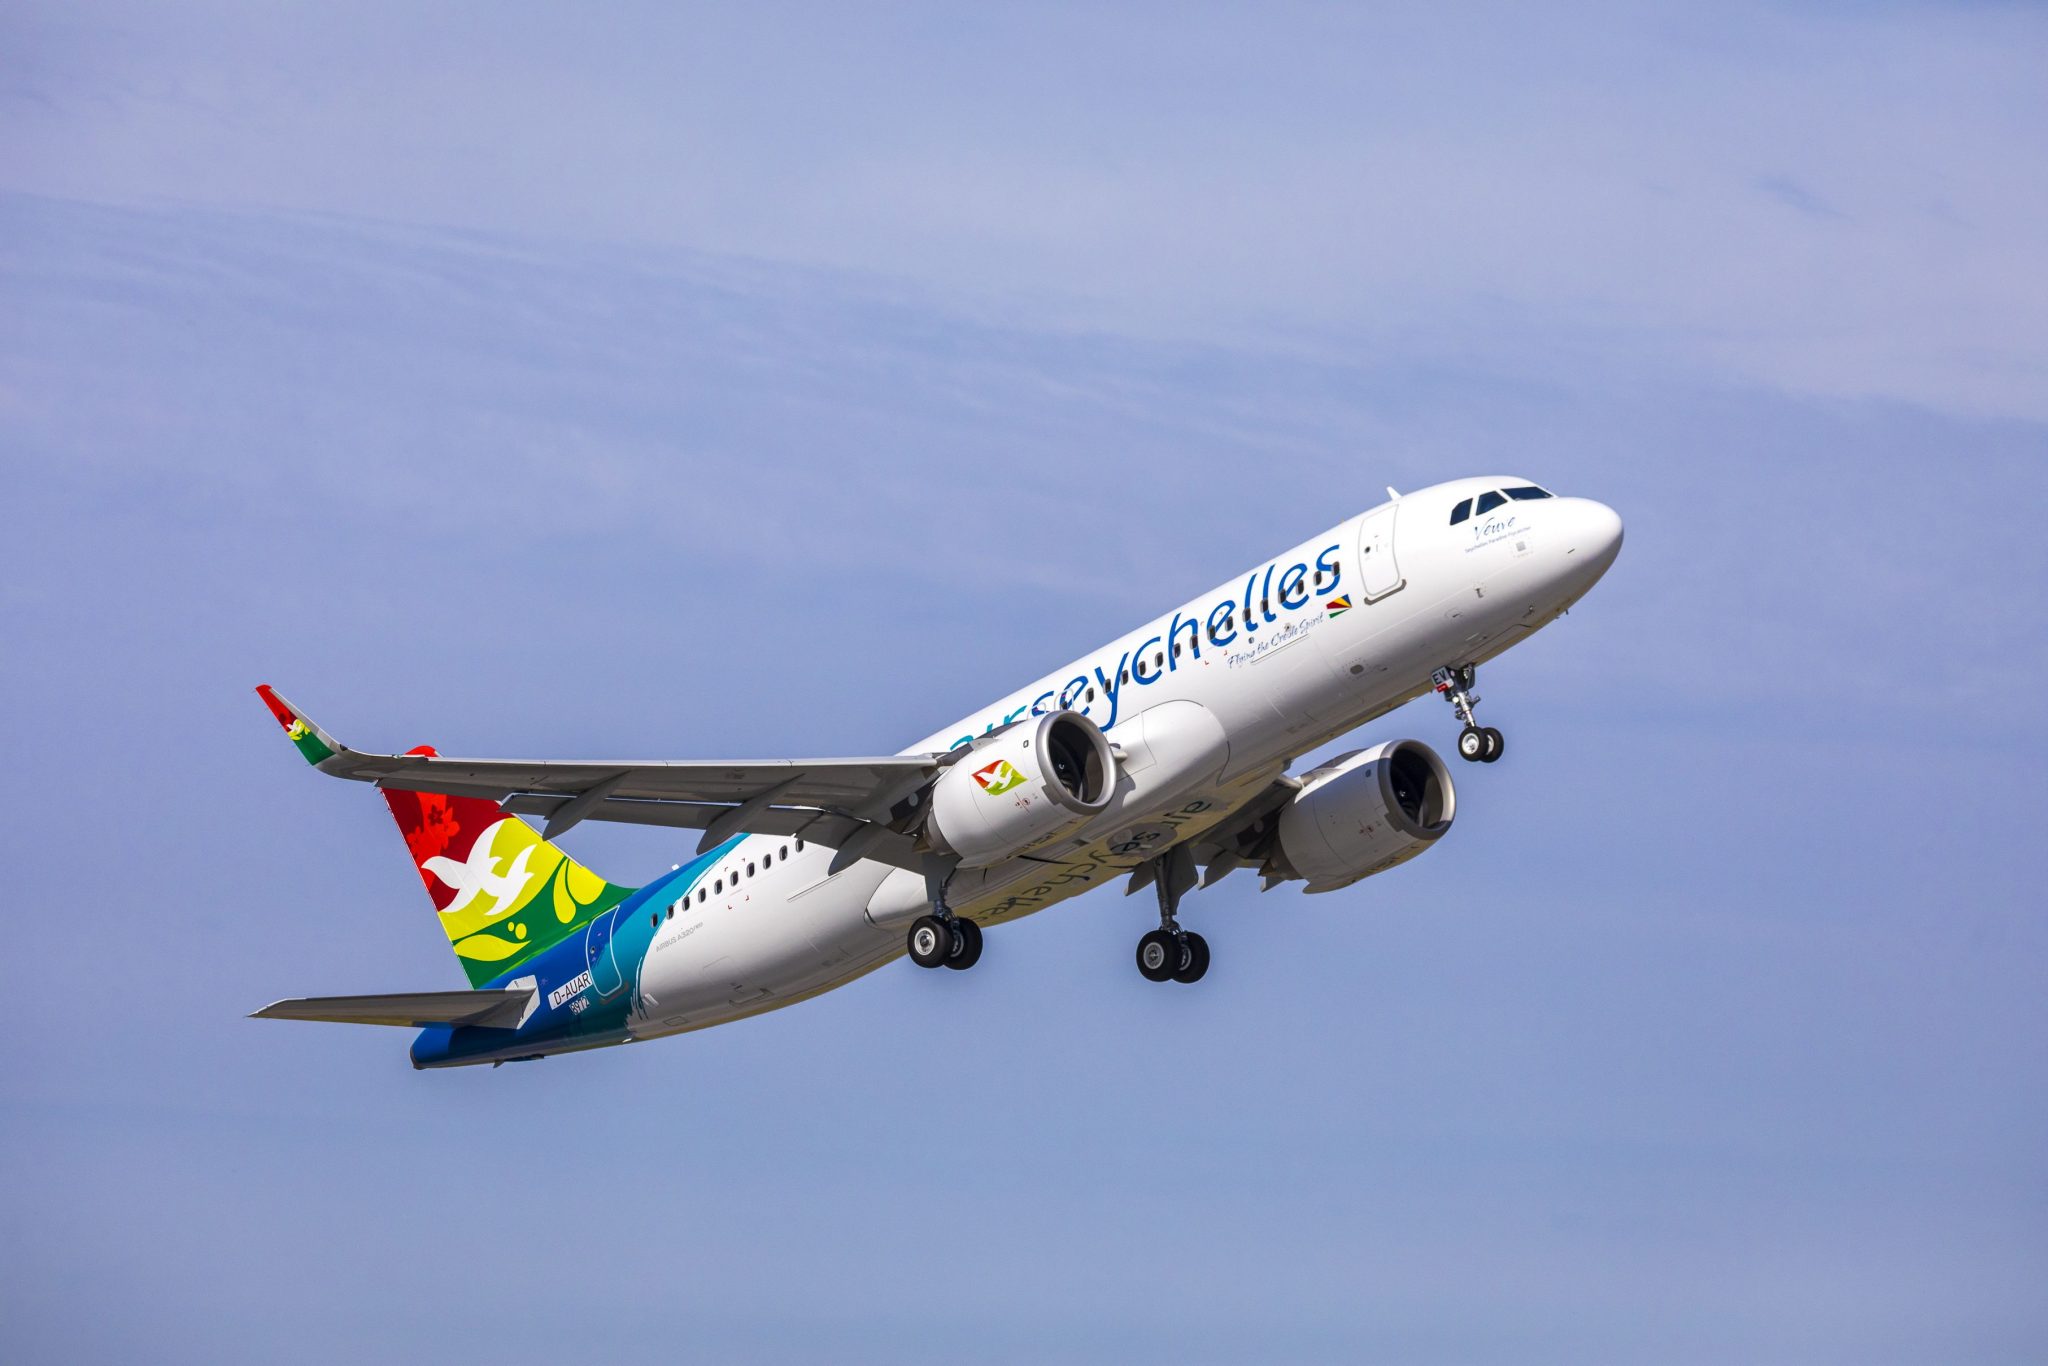 A Seychelles government has said Air Seychelles will not pay more than $20 million to settle the debt.